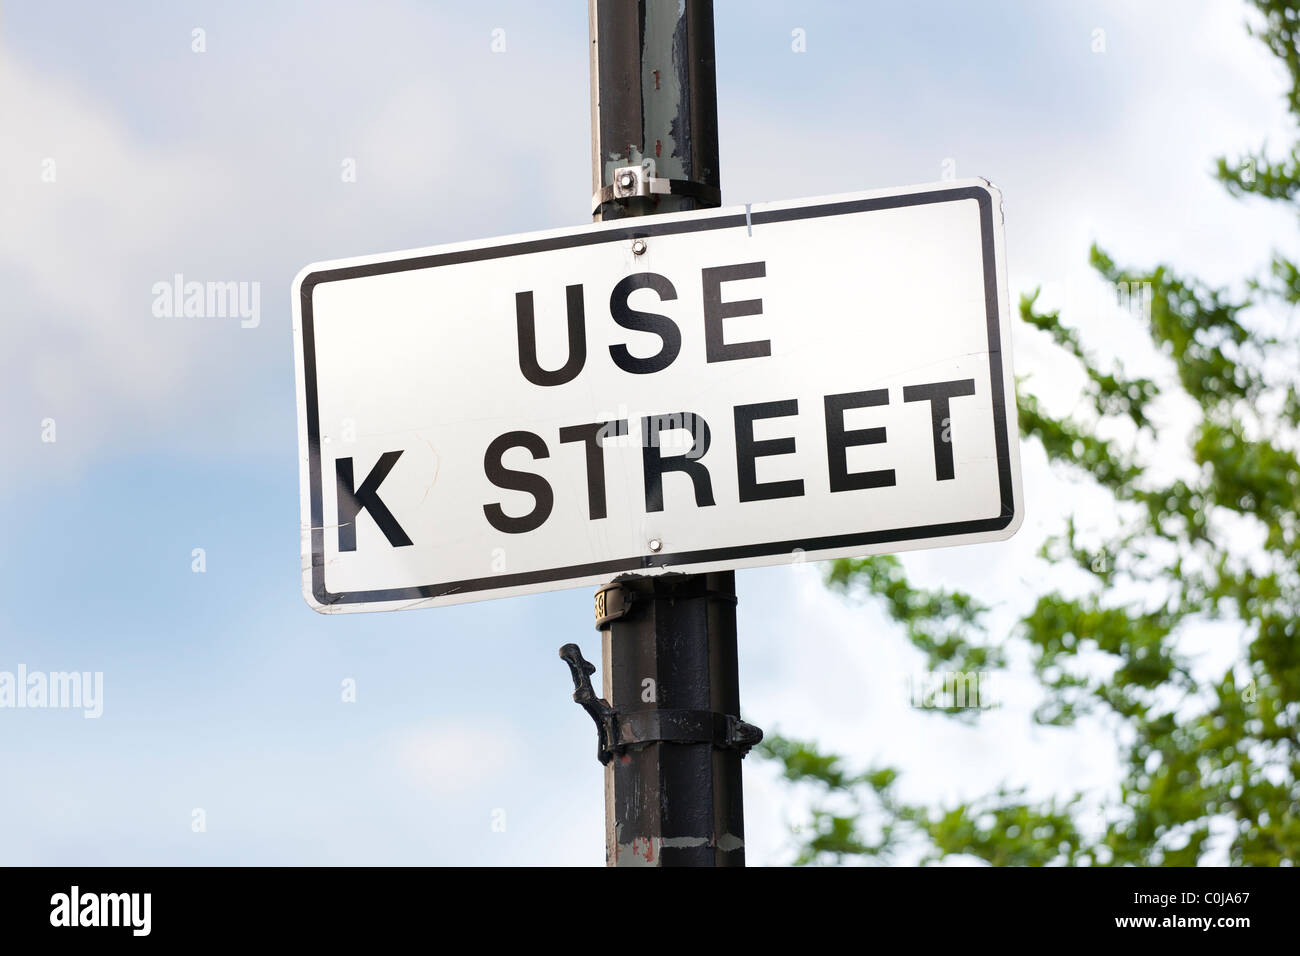 A street sign in Washington D.C. reading: Use K Street. K Street is a metaphor, figure of speech, for the US lobbying industry. Stock Photo